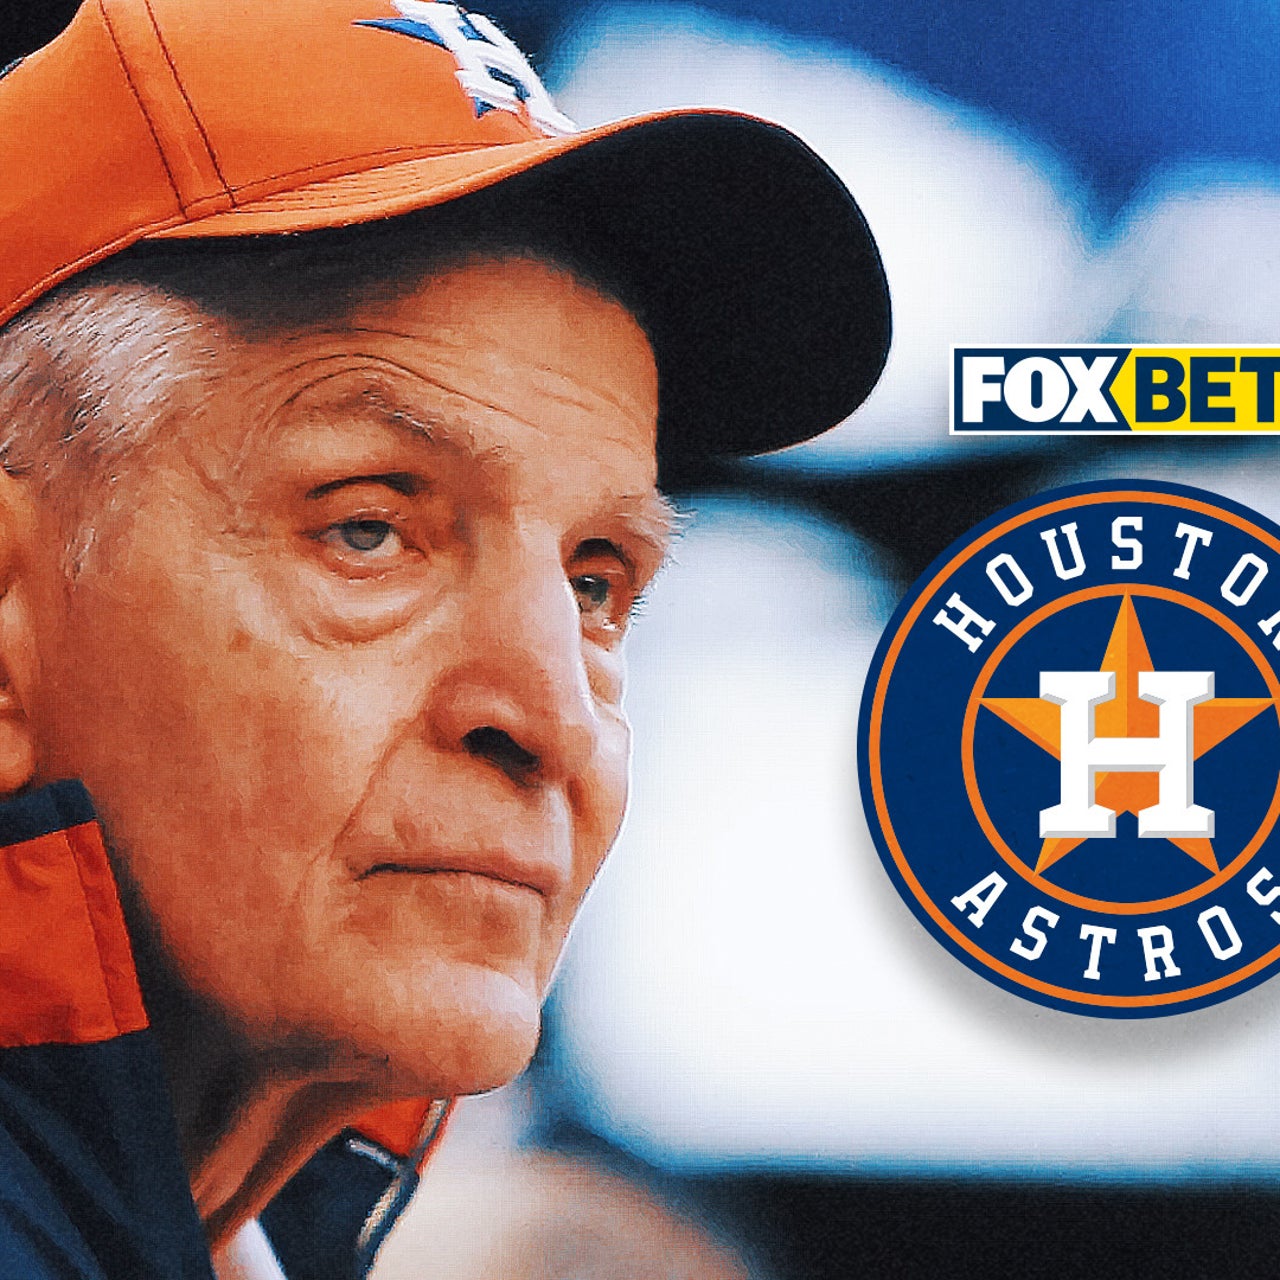 Mattress Mack Eyes A Record $75 Million Payday If The Astros Win The World  Series